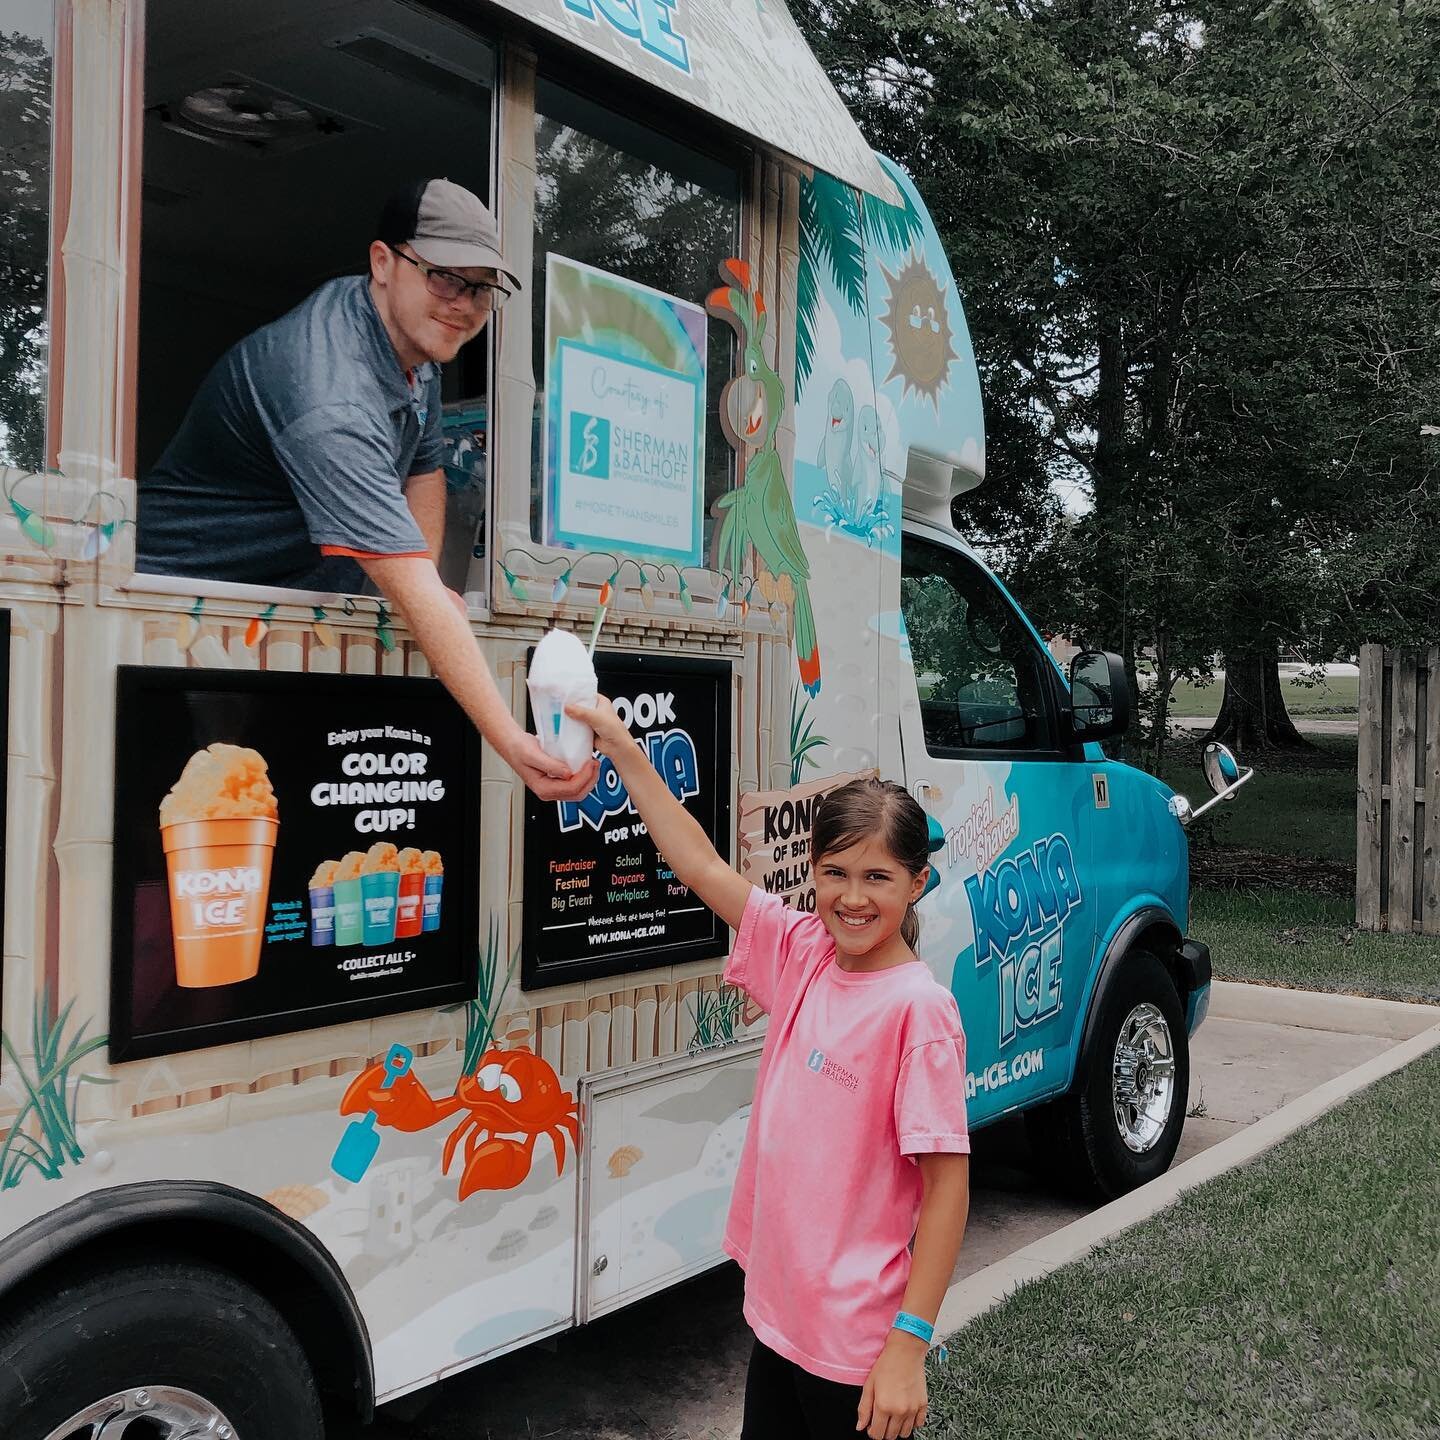 FREE SNOWBALLS TODAY!! 🎉🎉🎉Have a summer treat, on us. Today at our office in Central, come grab a free snowball from the @konaicebr truck. It will be at our office from 1:30-3:30 🙌🙌🙌 #MoreThanSmiles